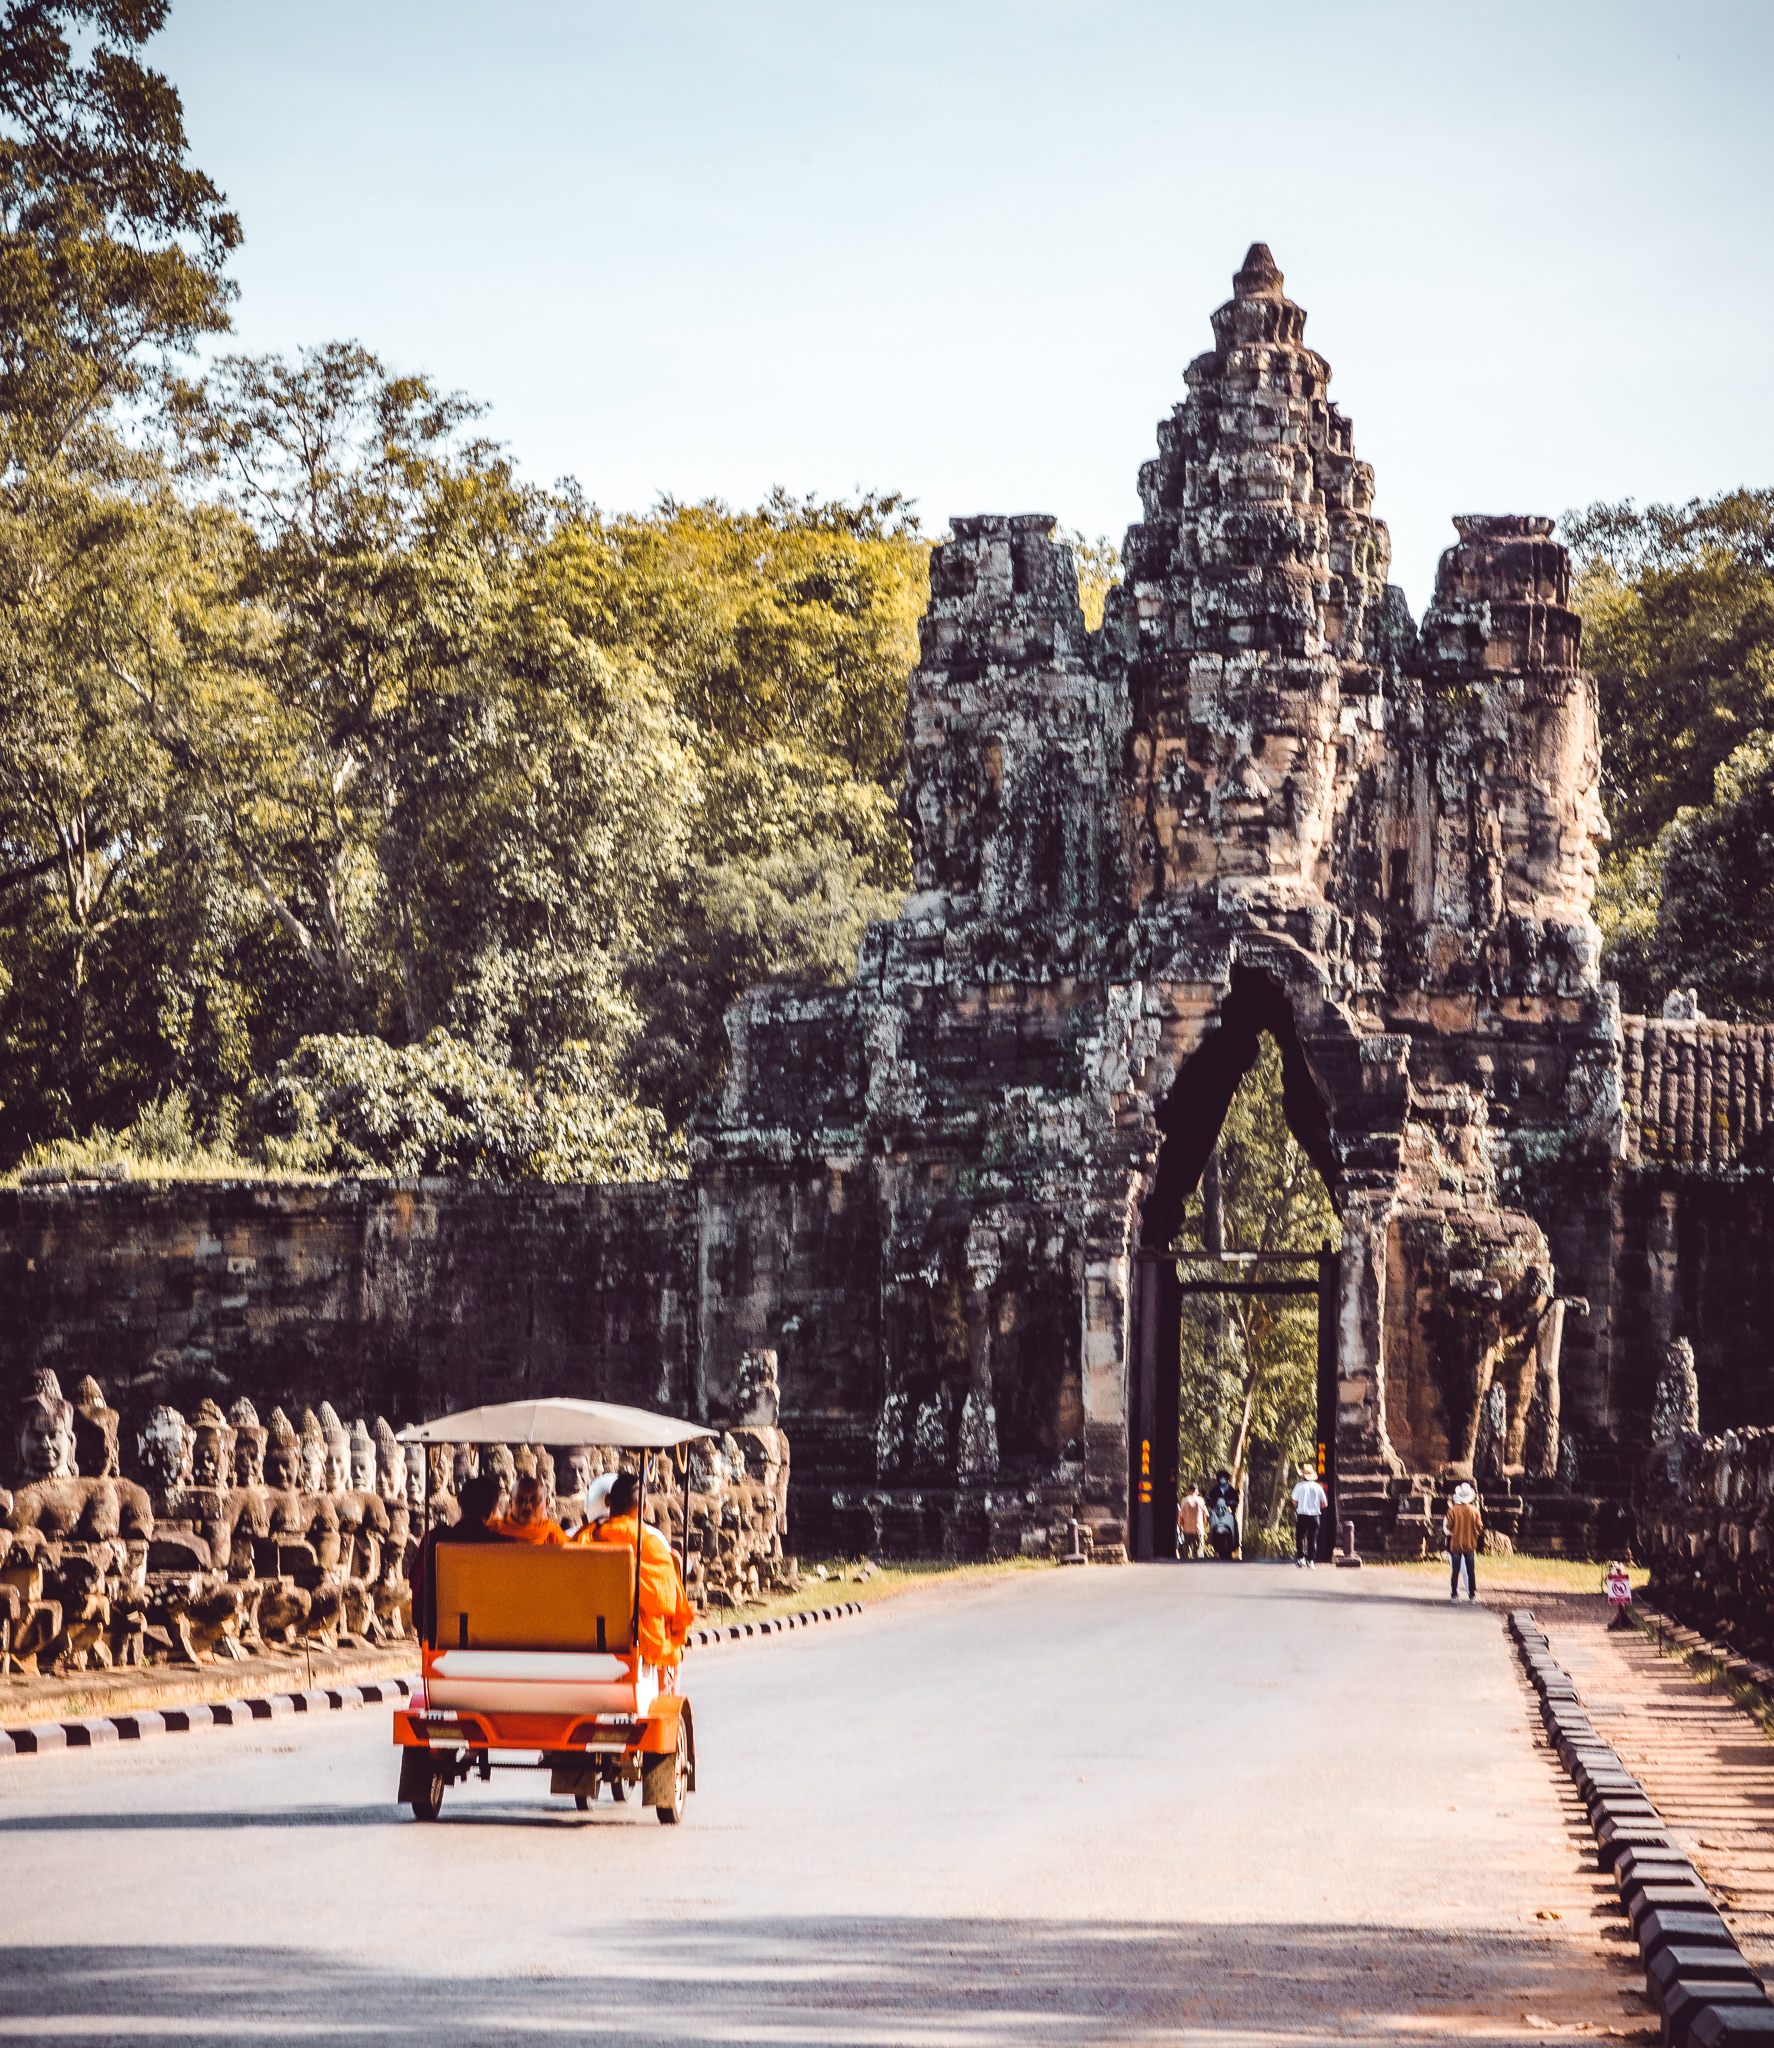 Tuk-tuk on a road approaching a historic stone gate with sculptures on the sides